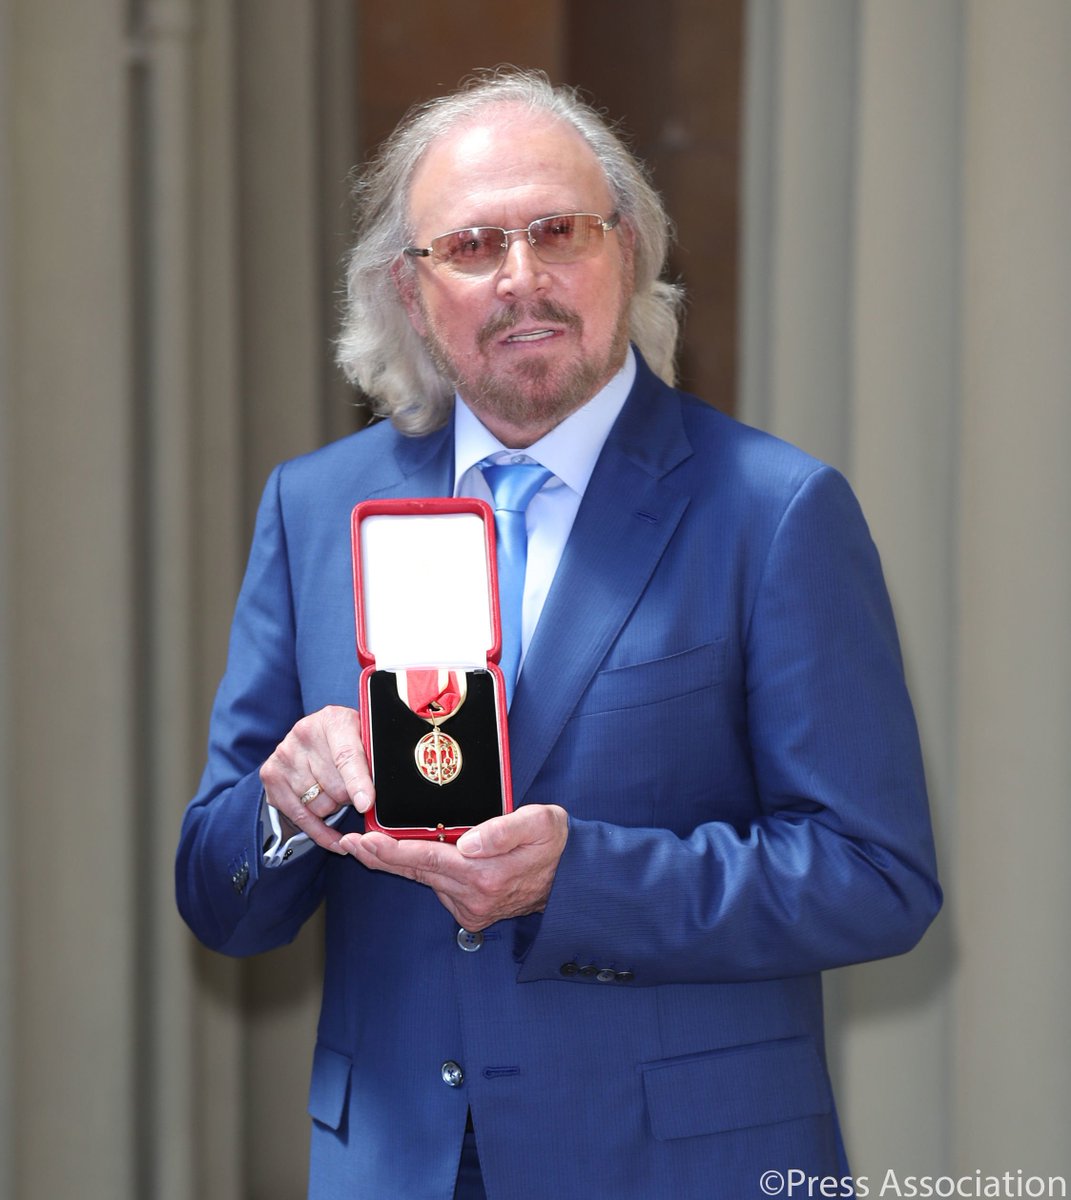 Congratulations Sir Barry Gibb!

The co-founder of the Bee Gees today received a Knighthood for his services to music and charity.